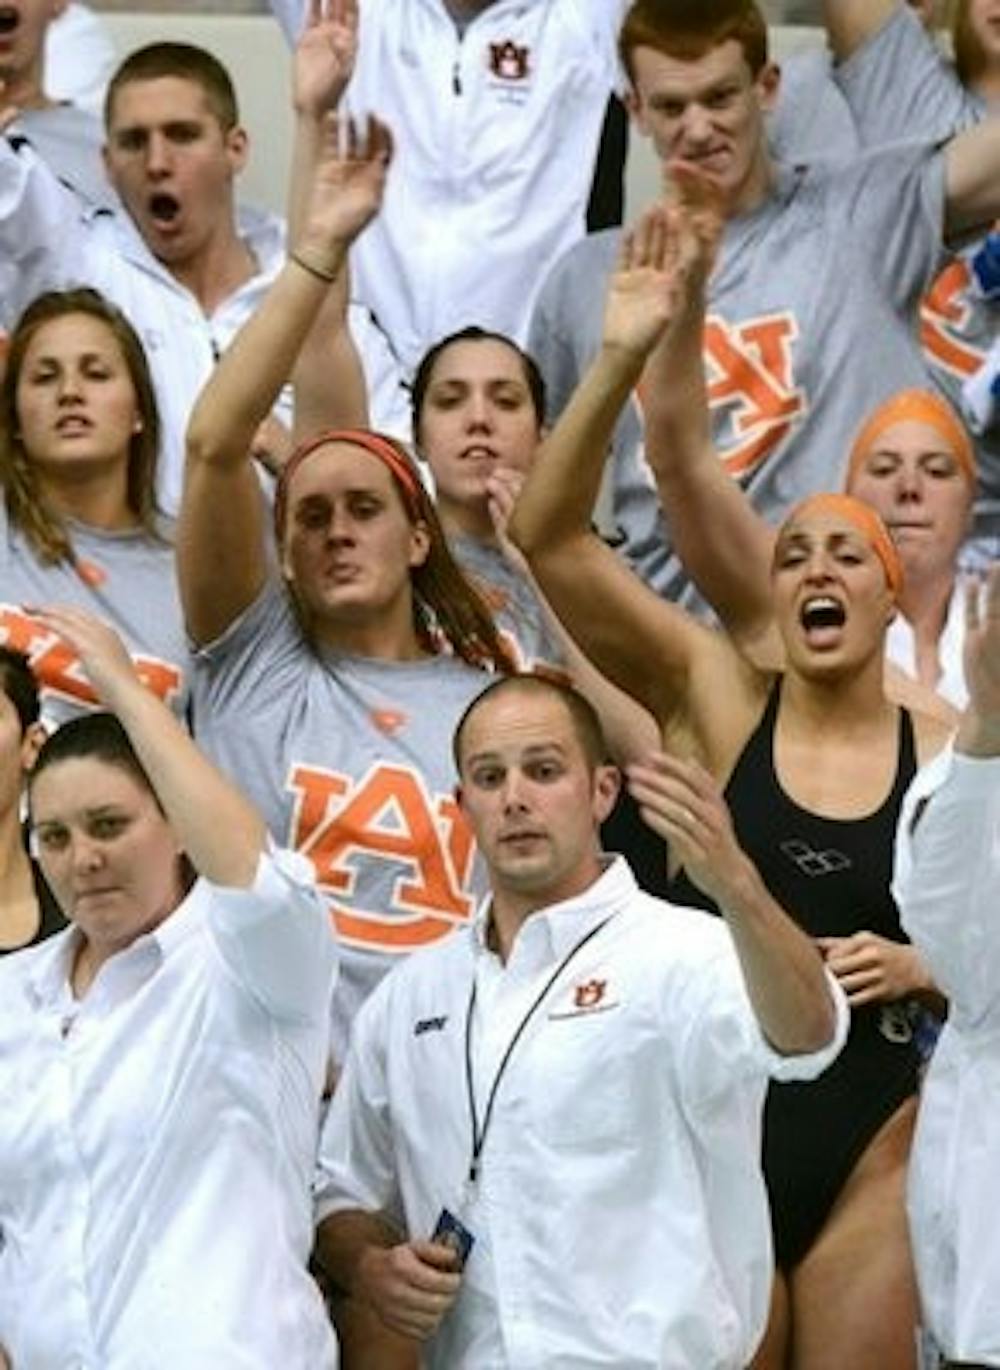 The women's swim team hopes to improve their SEC Championship re-sults at the NCAA Championship.